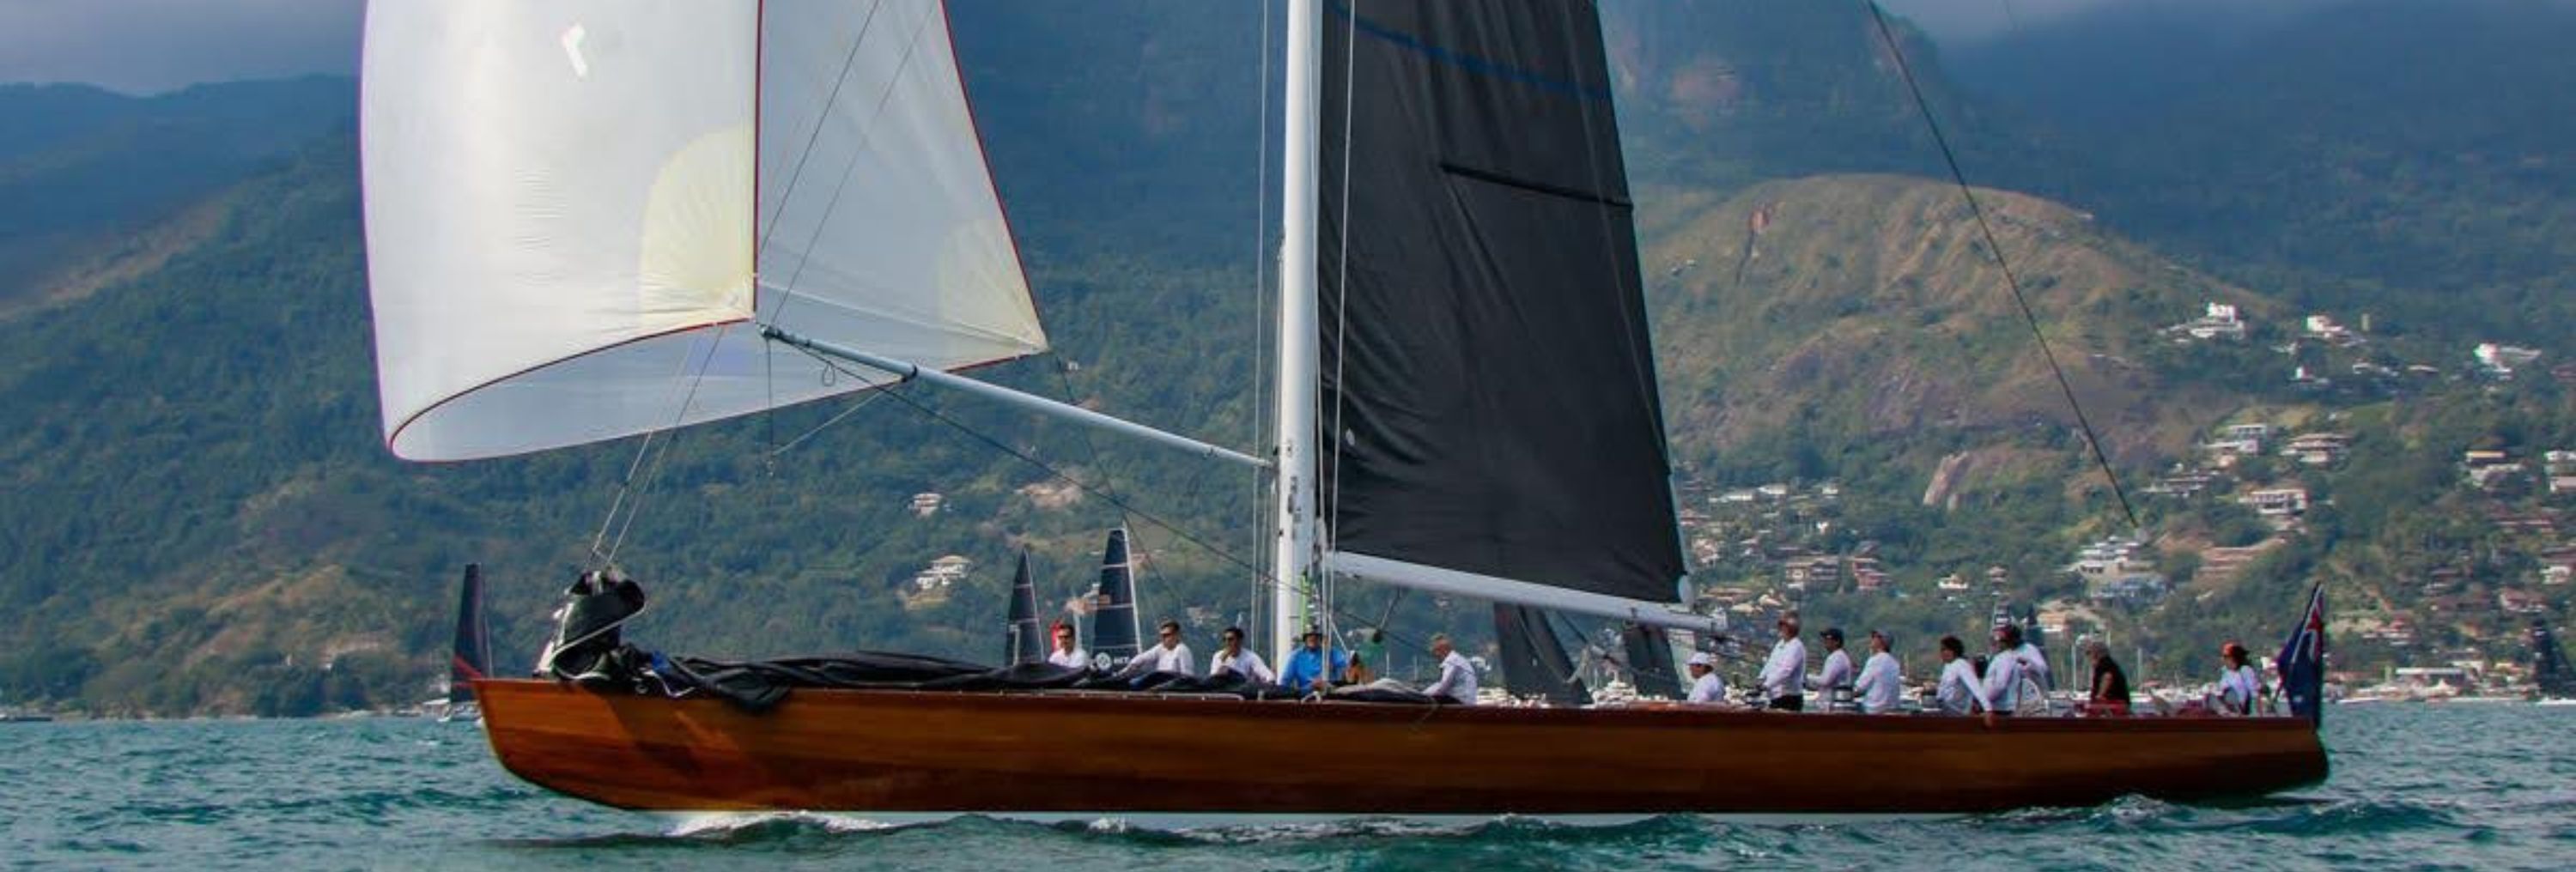 CHANCEGGER: New racing yacht available for sale!